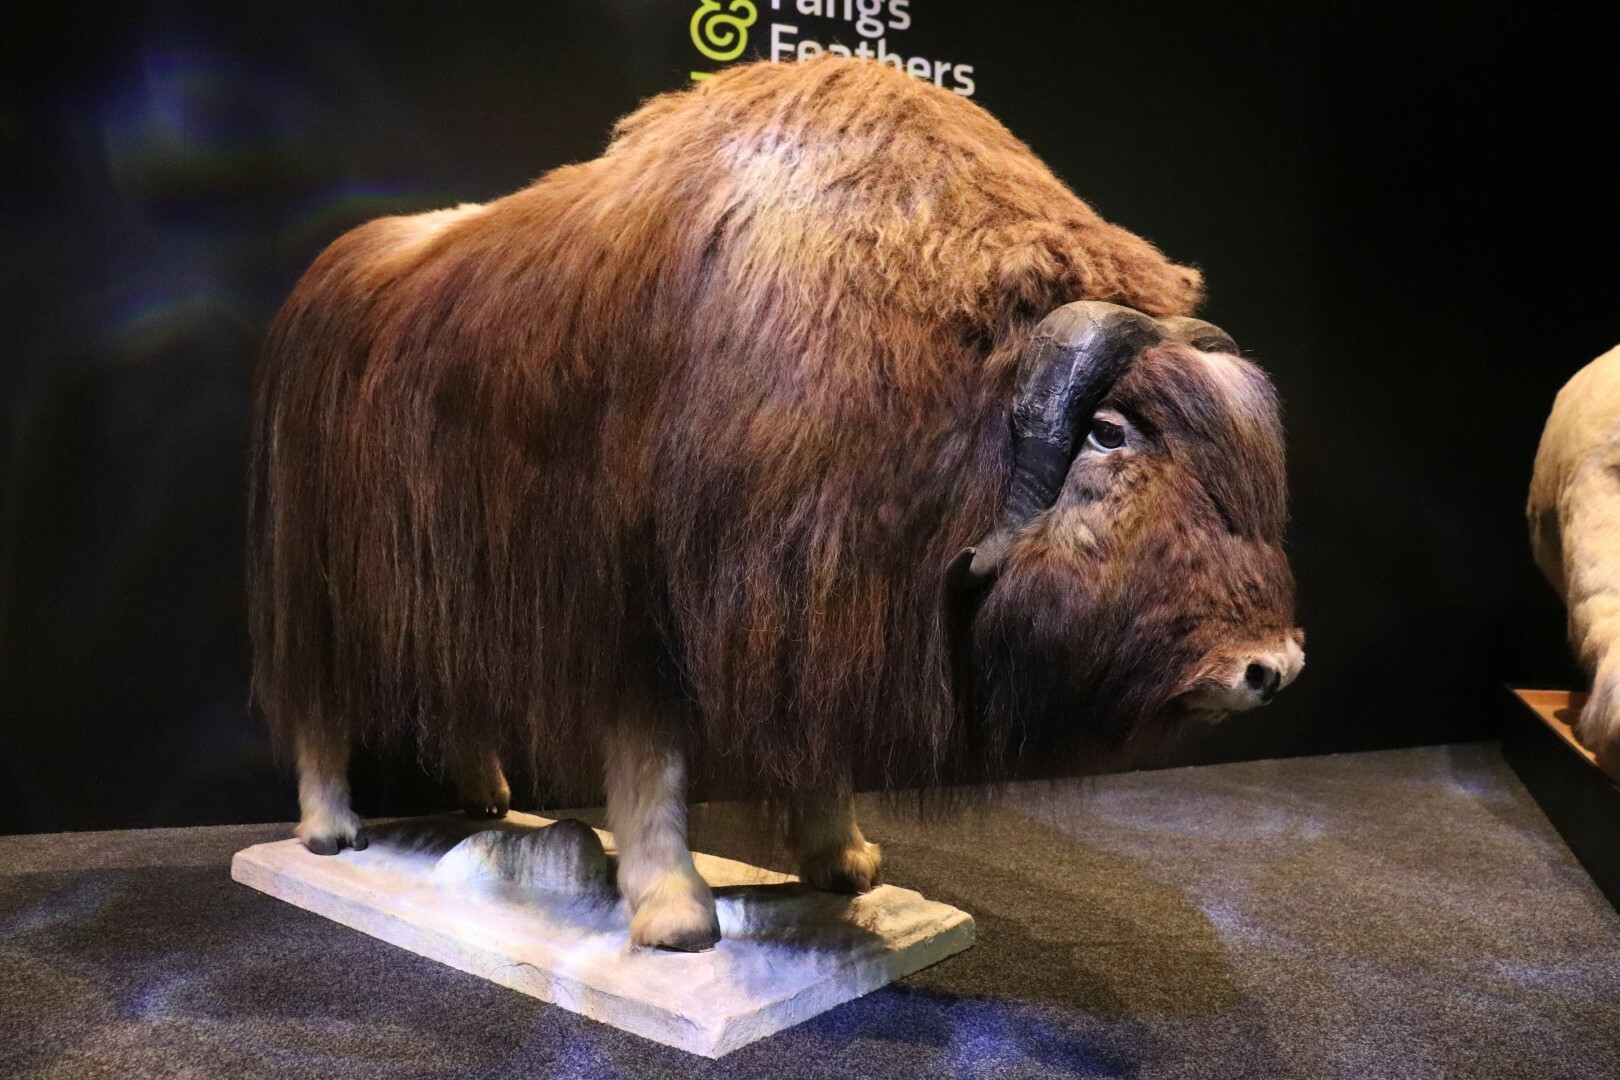 The muskox in Fur, Fangs and Feathers